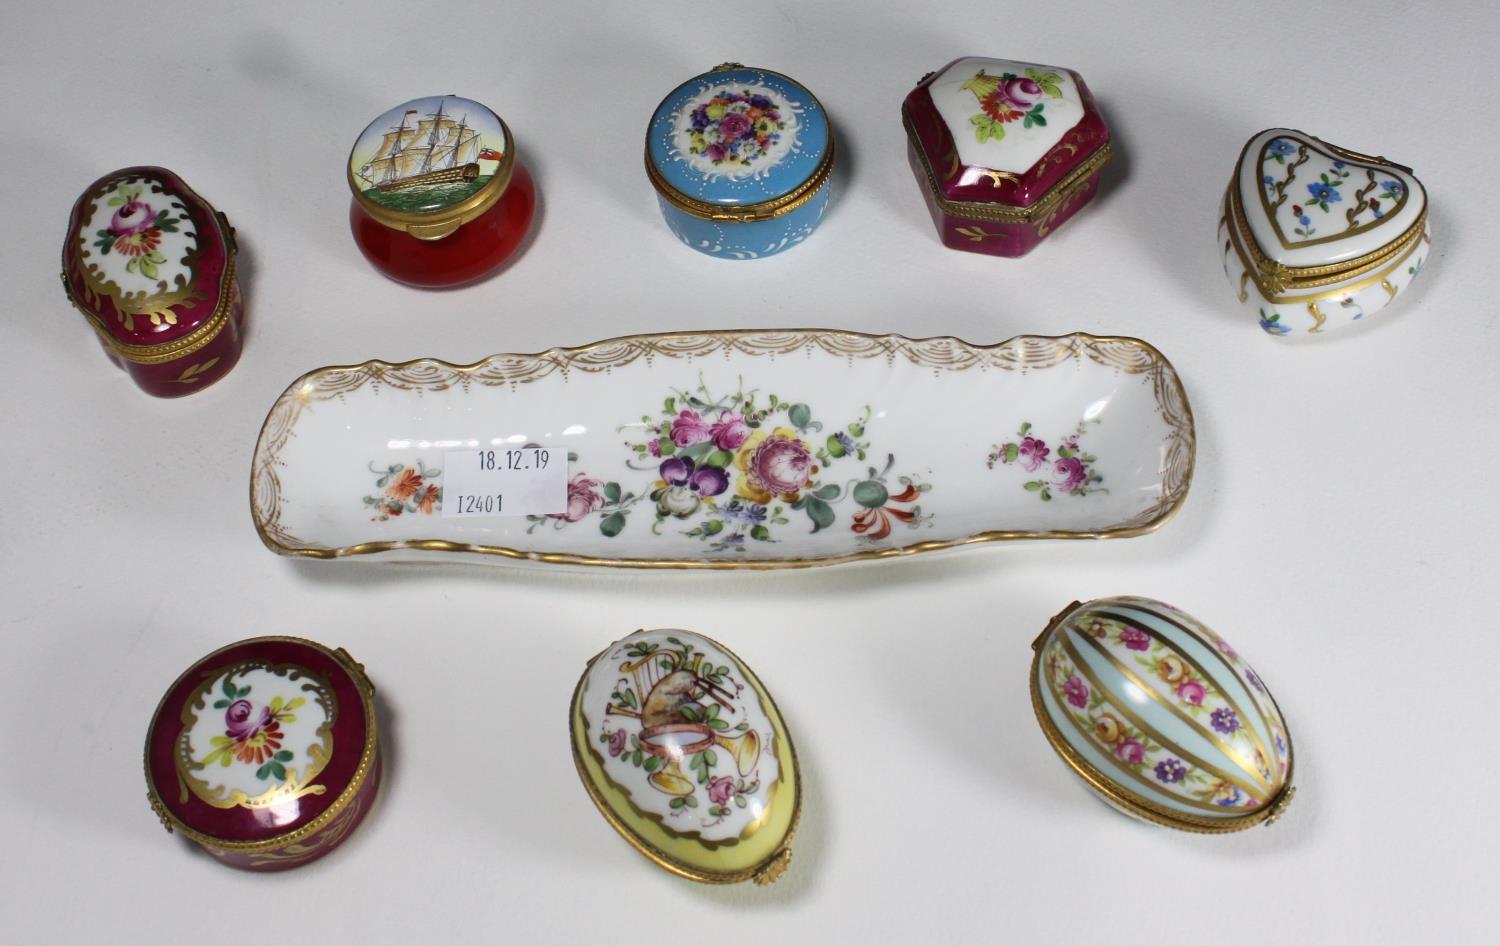 Seven enamelled French porcelain shaped boxes with gilt-metal-mounted hinged covers and polychrome